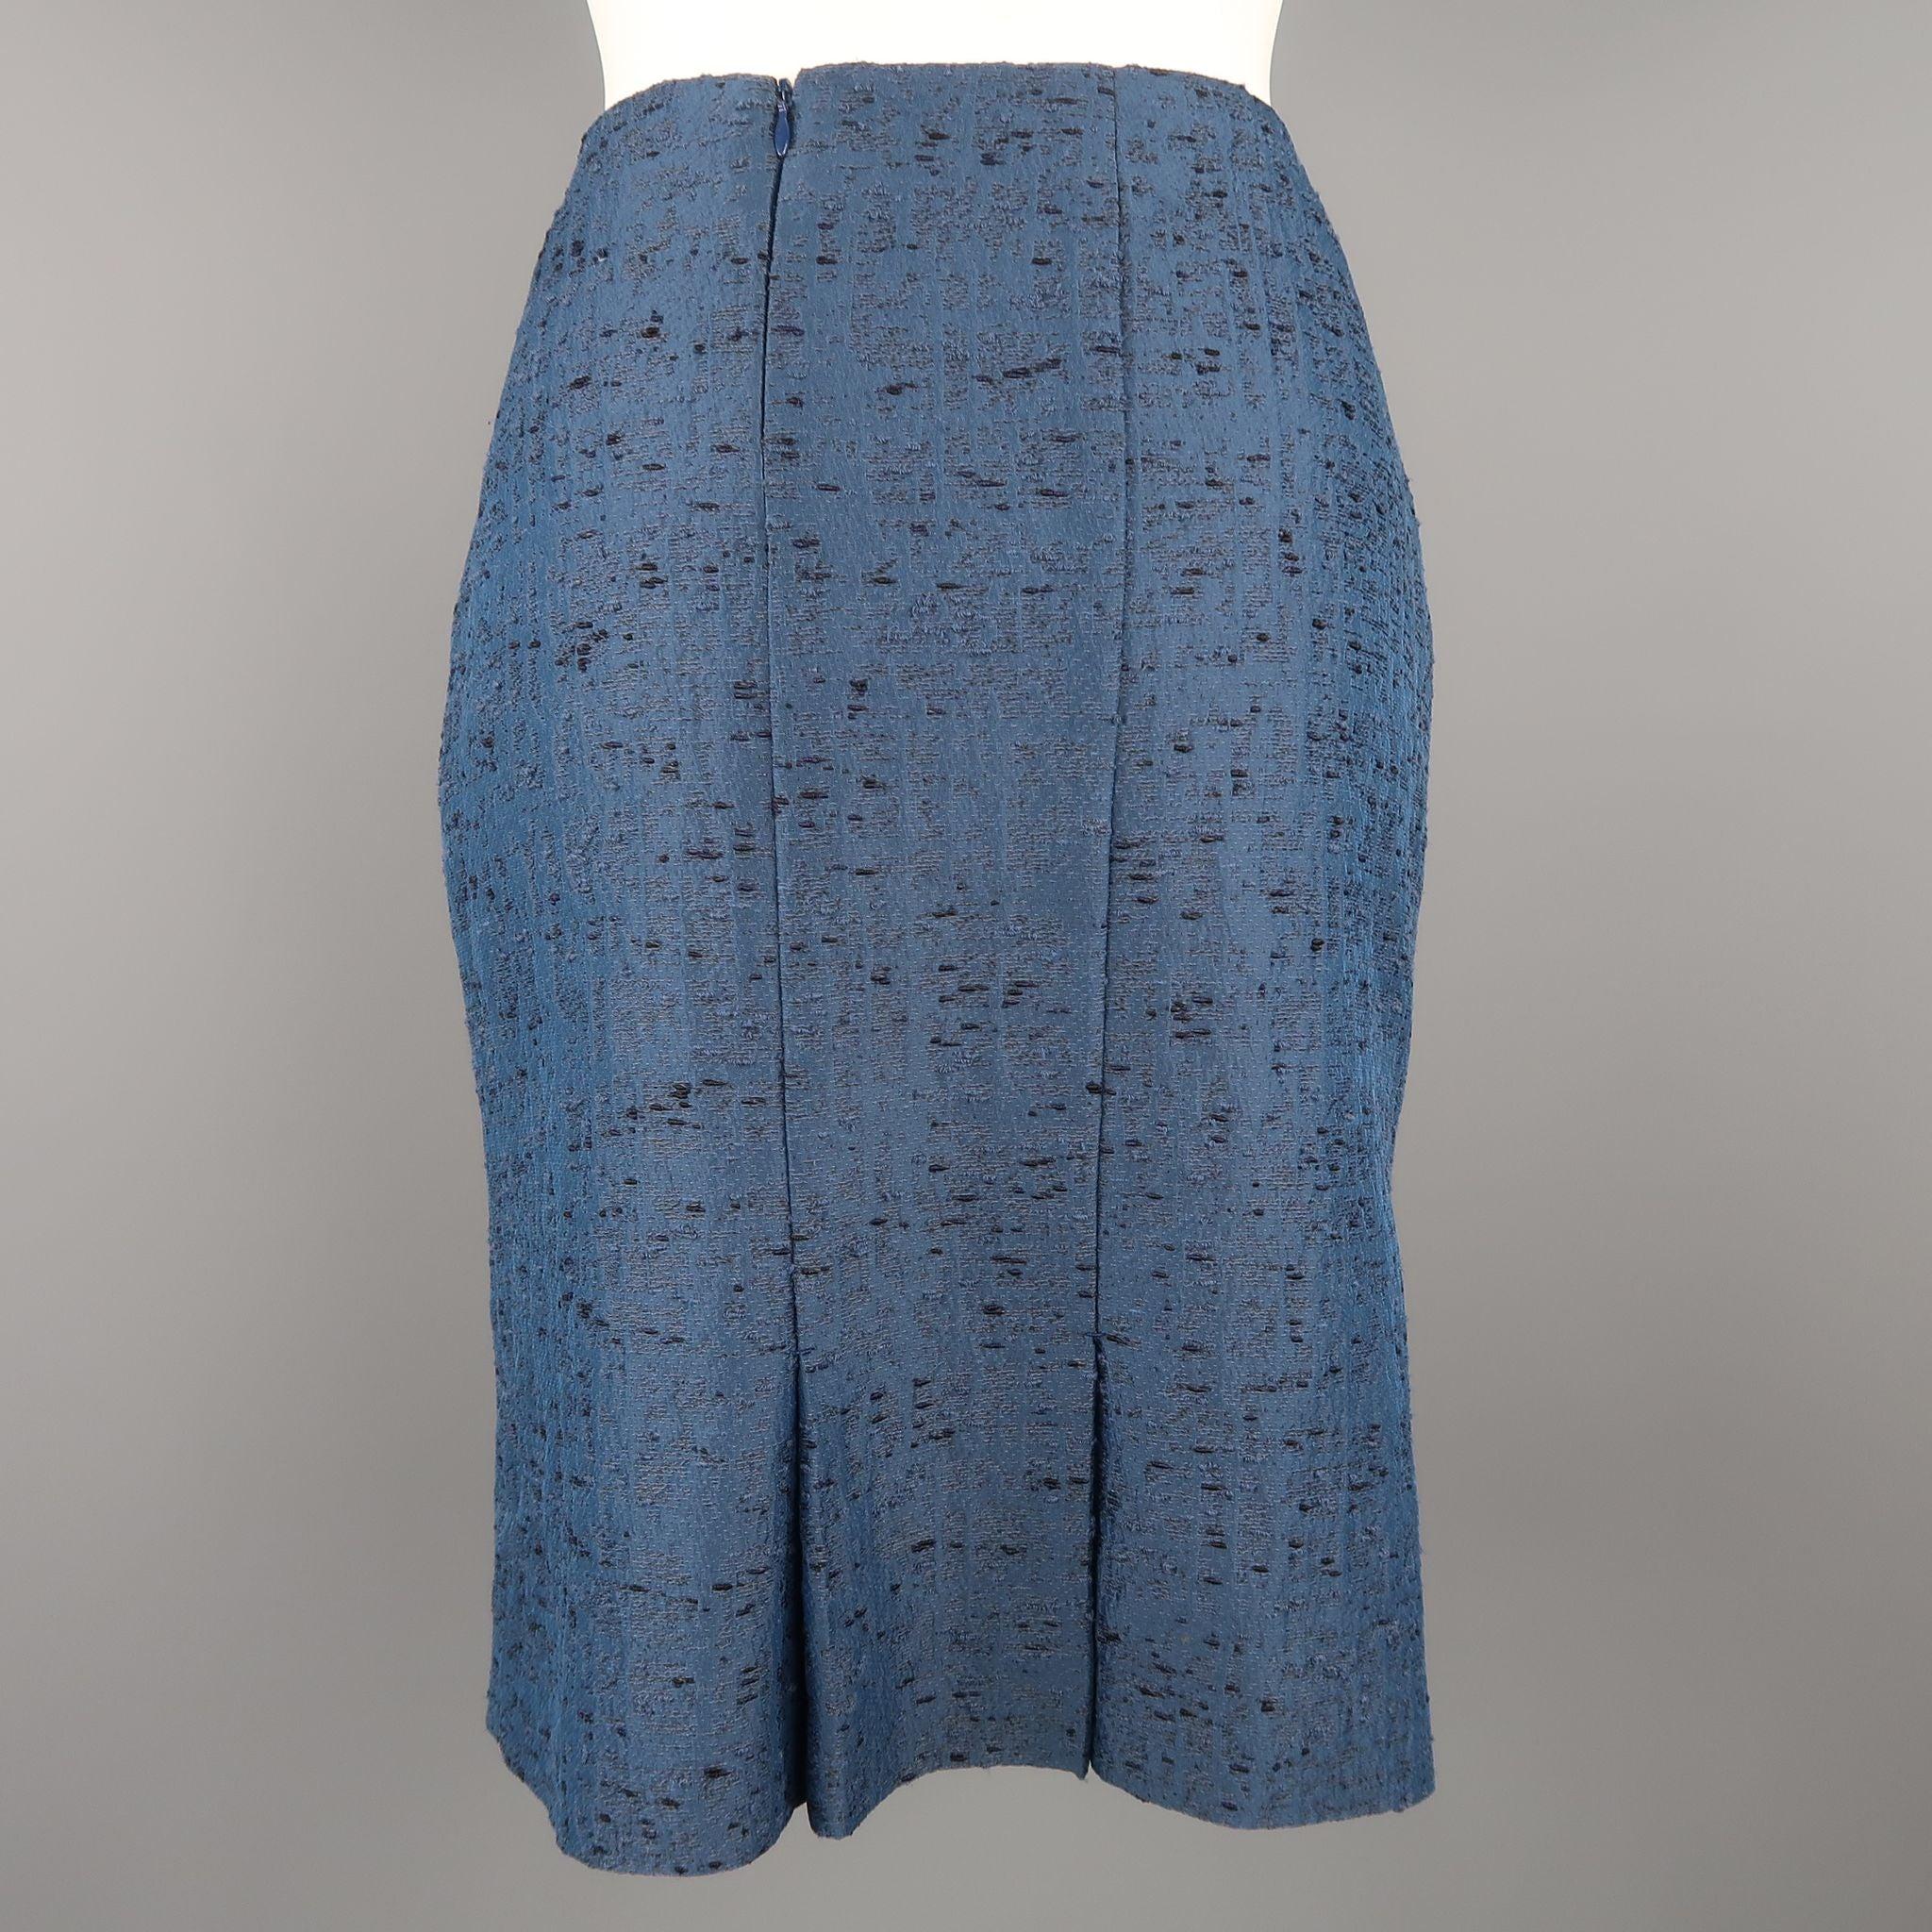 VALENTINO Size 6 Blue Textured Taffeta Pencil Skirt In Excellent Condition For Sale In San Francisco, CA